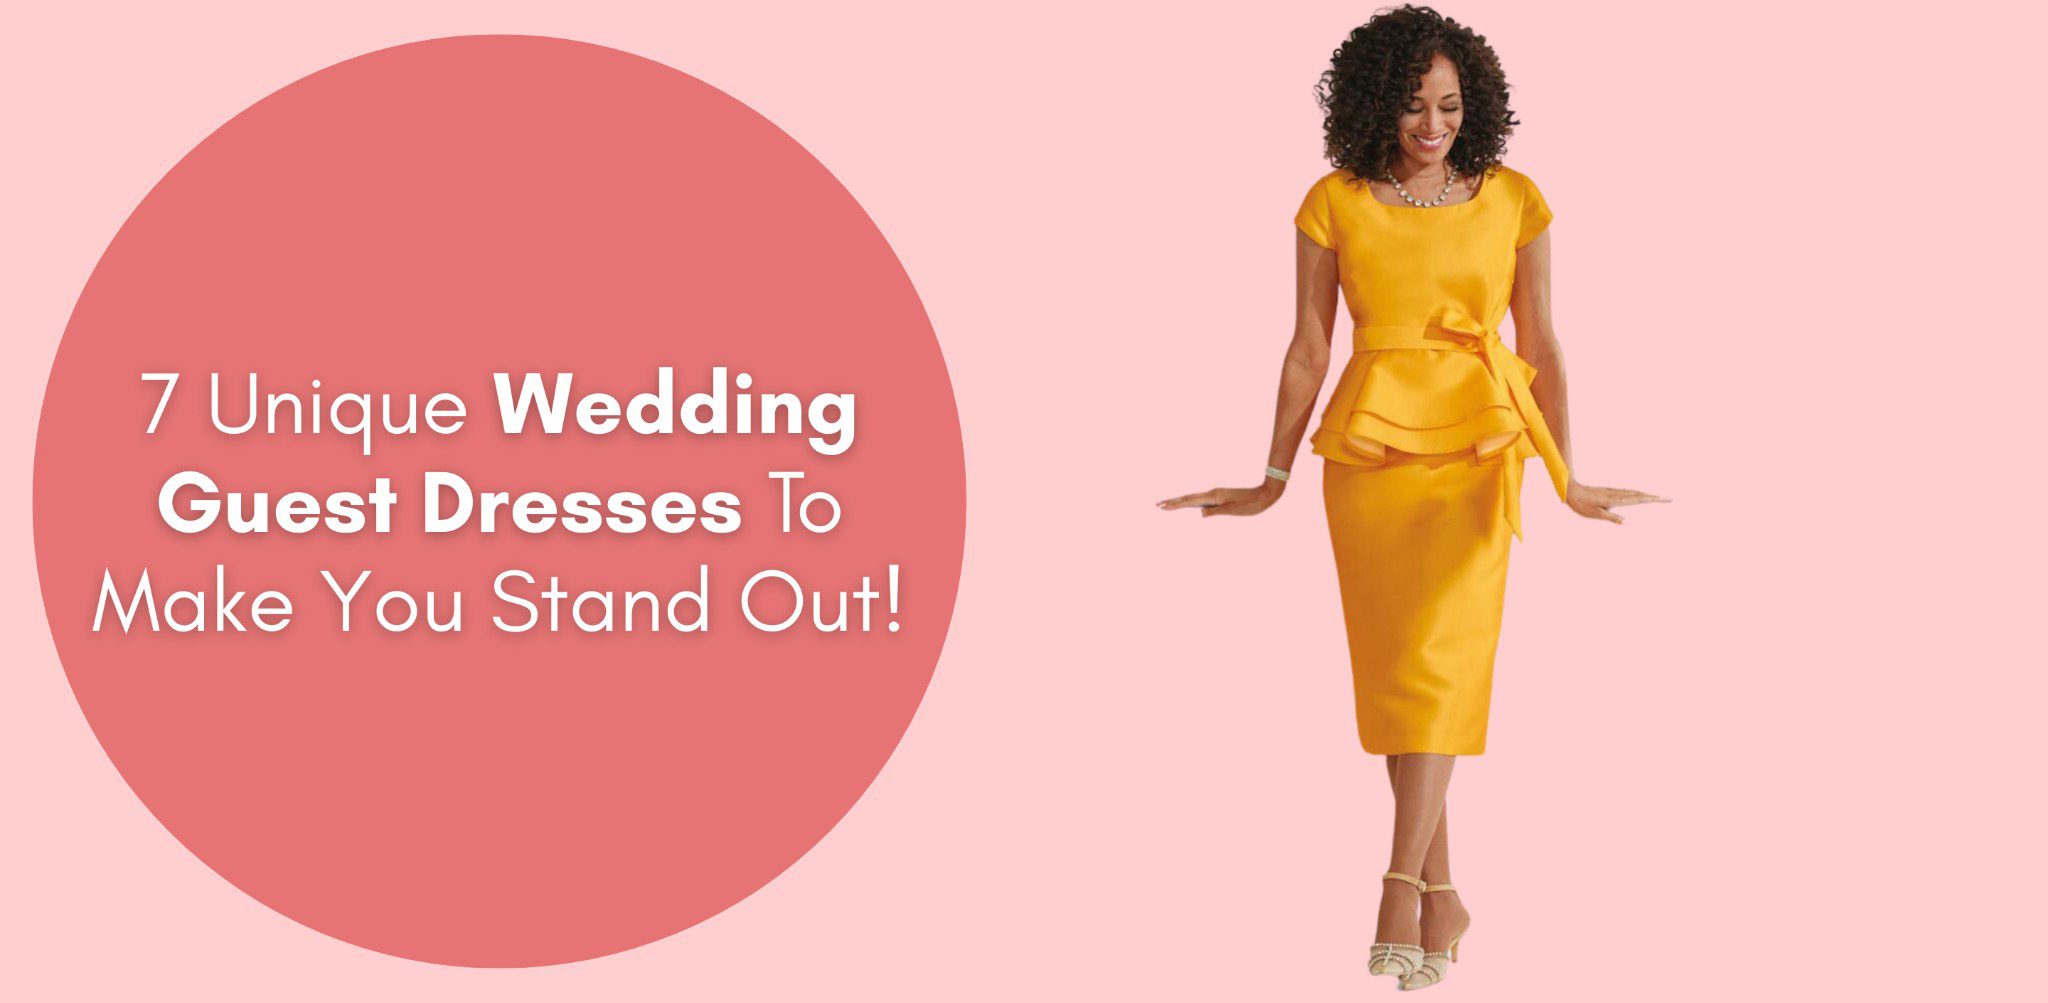 7 Unique Wedding Guest Dresses To Make You Stand Out!